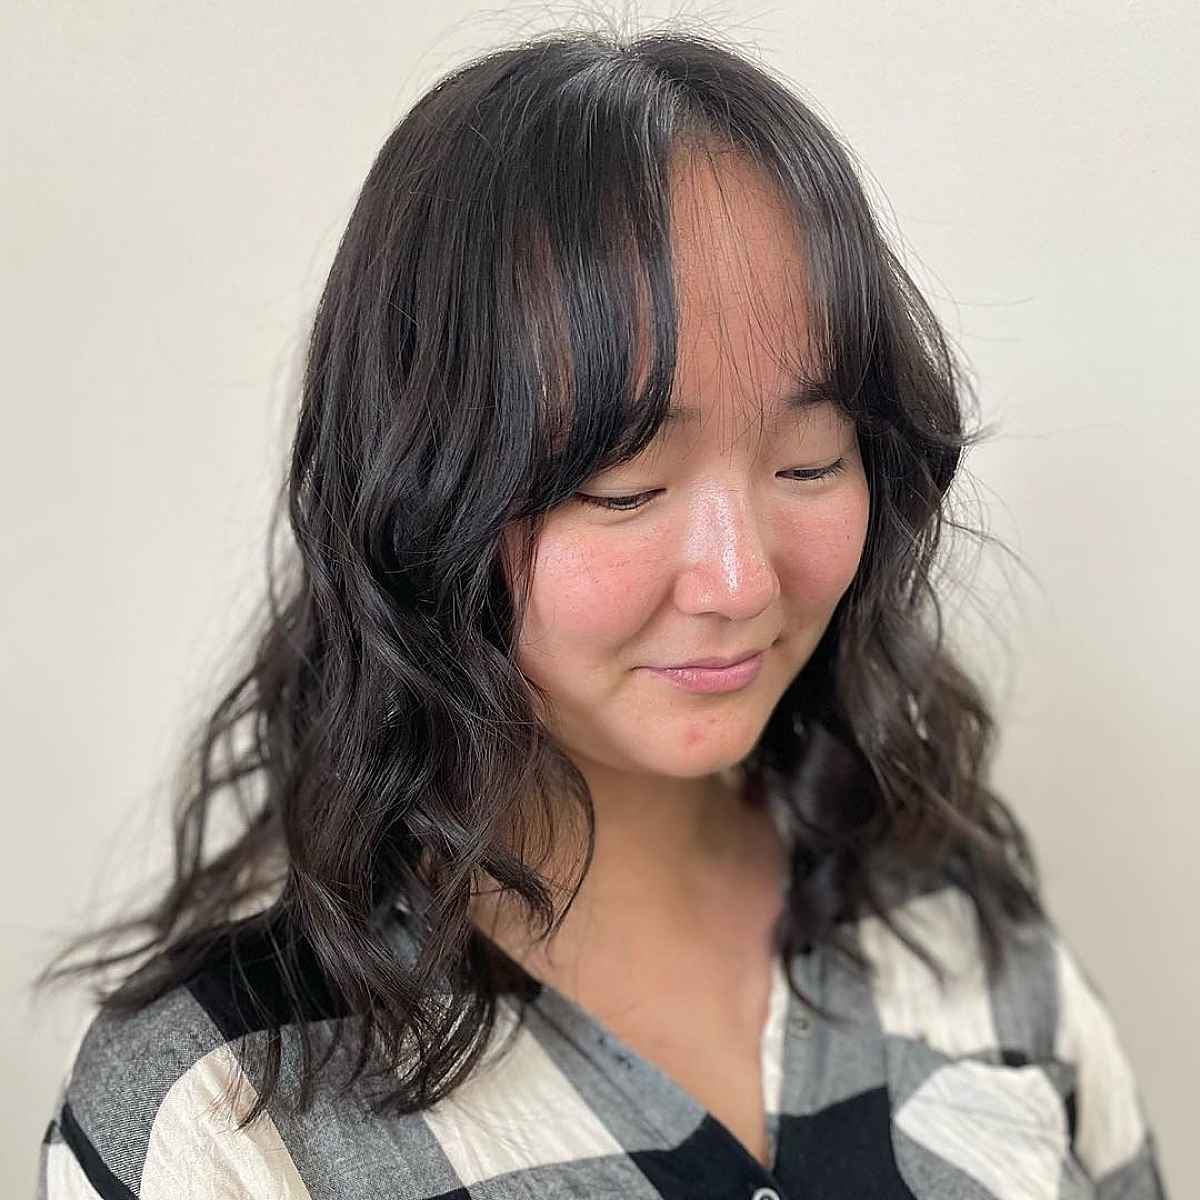 Loose Waves and Straight Curtain Bangs